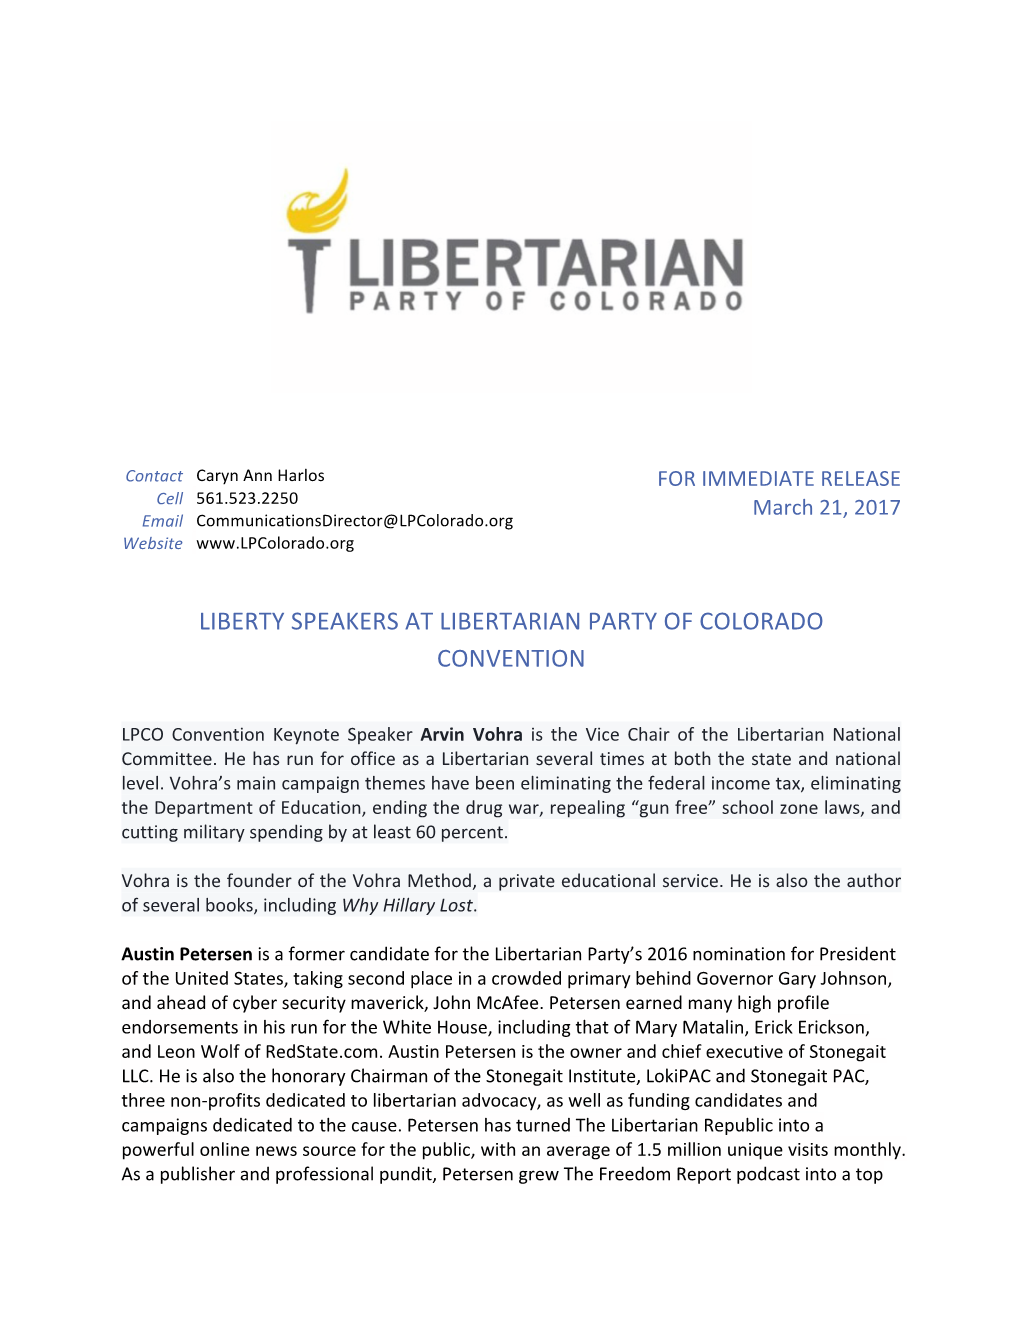 Liberty Speakers at Libertarian Party of Colorado Convention